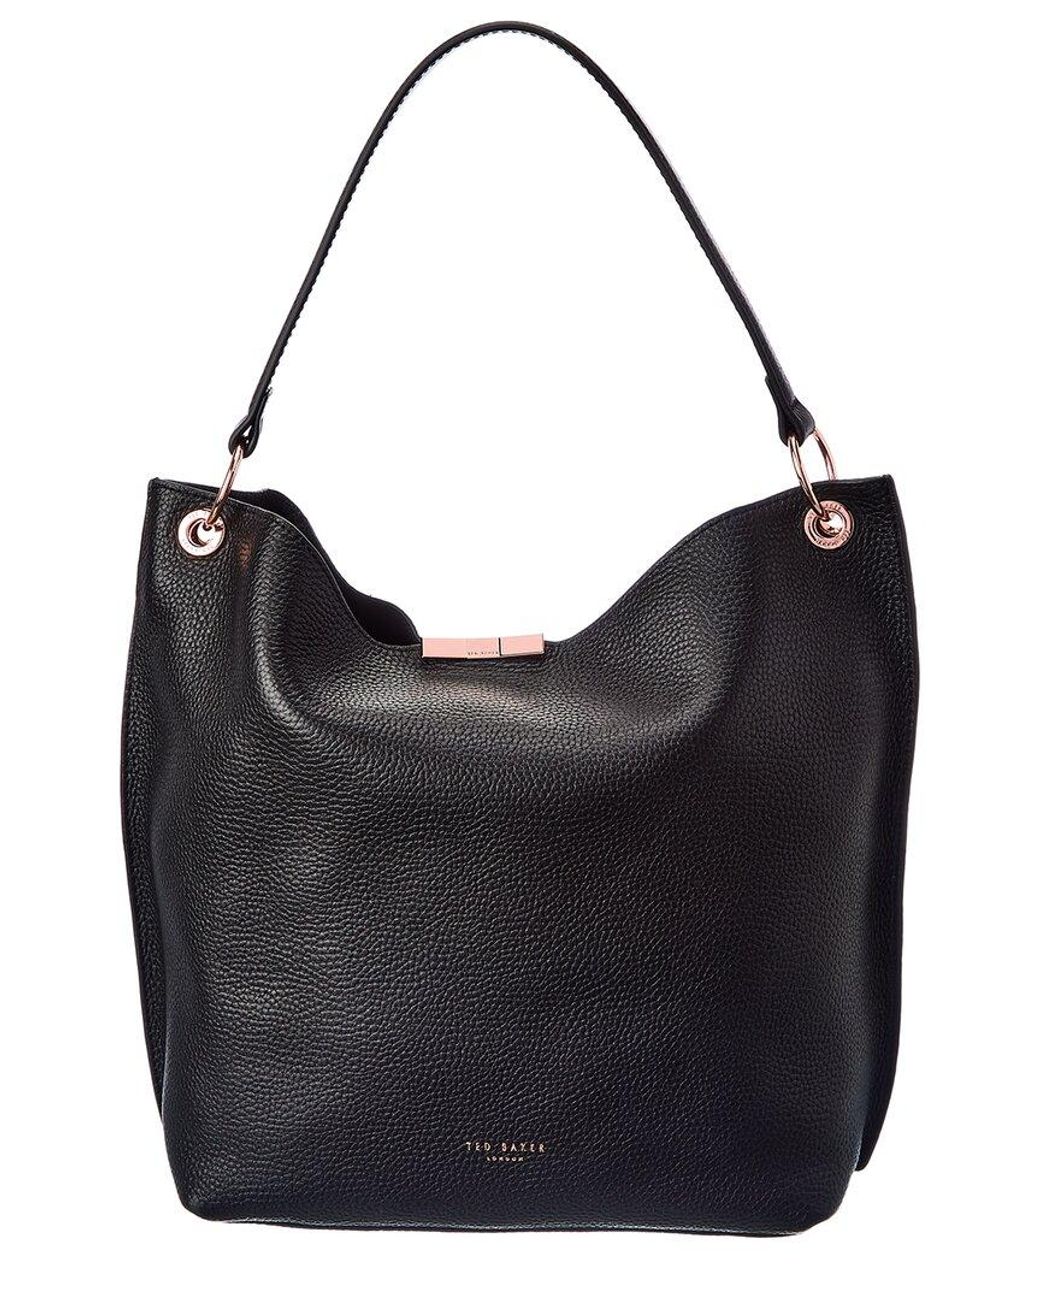 Ted Baker Candiee Leather Hobo Bag in Black | Lyst